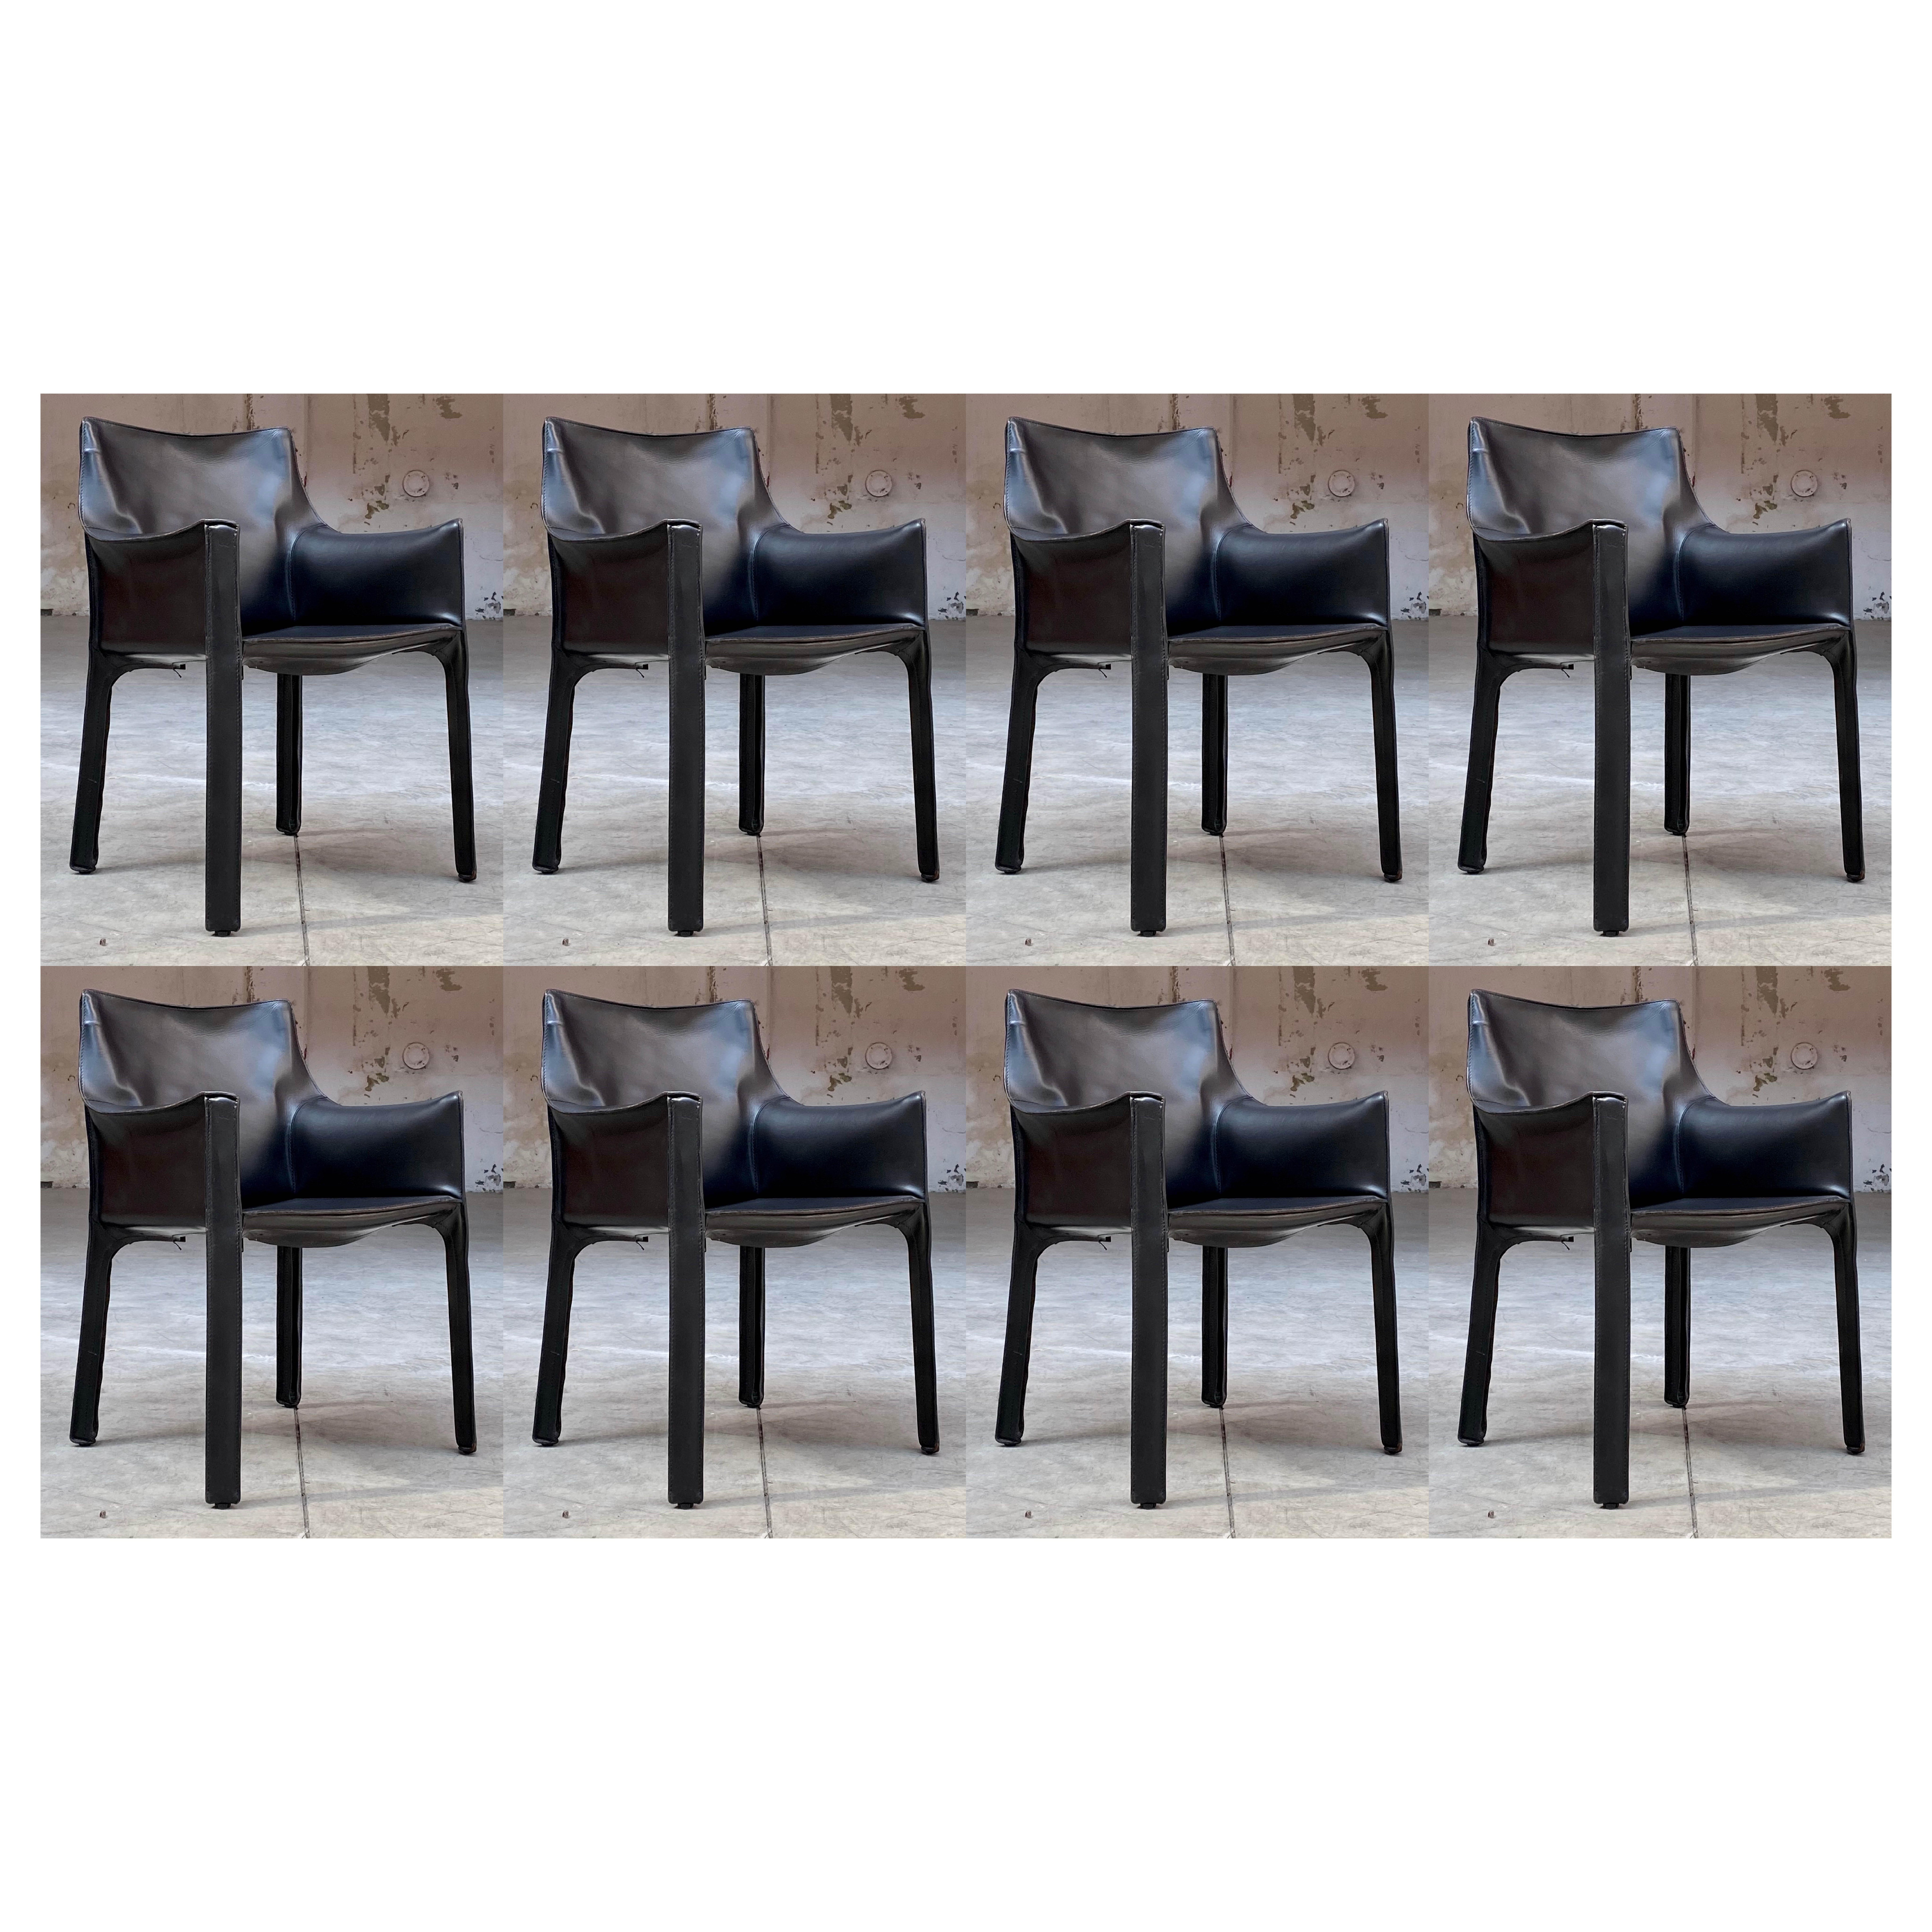 Mario Bellini "CAB 413" Chairs for Cassina in Black, 1977, Set of 8